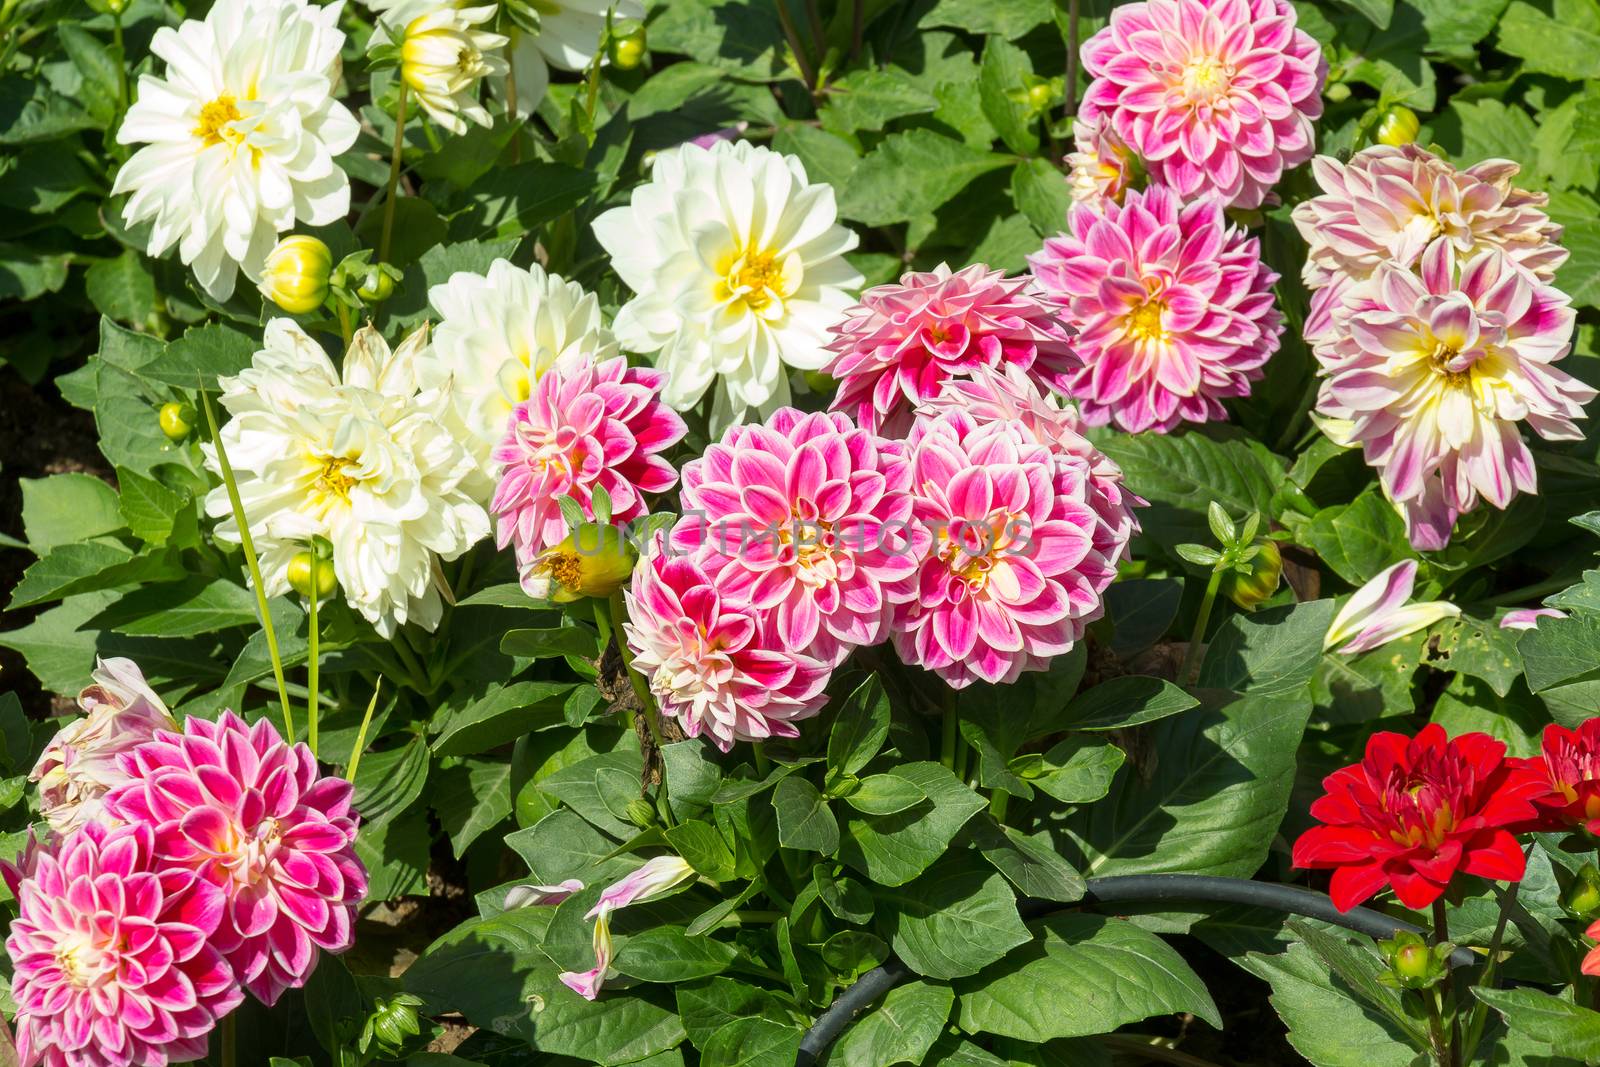 Dahlia garden in various colors by chingraph